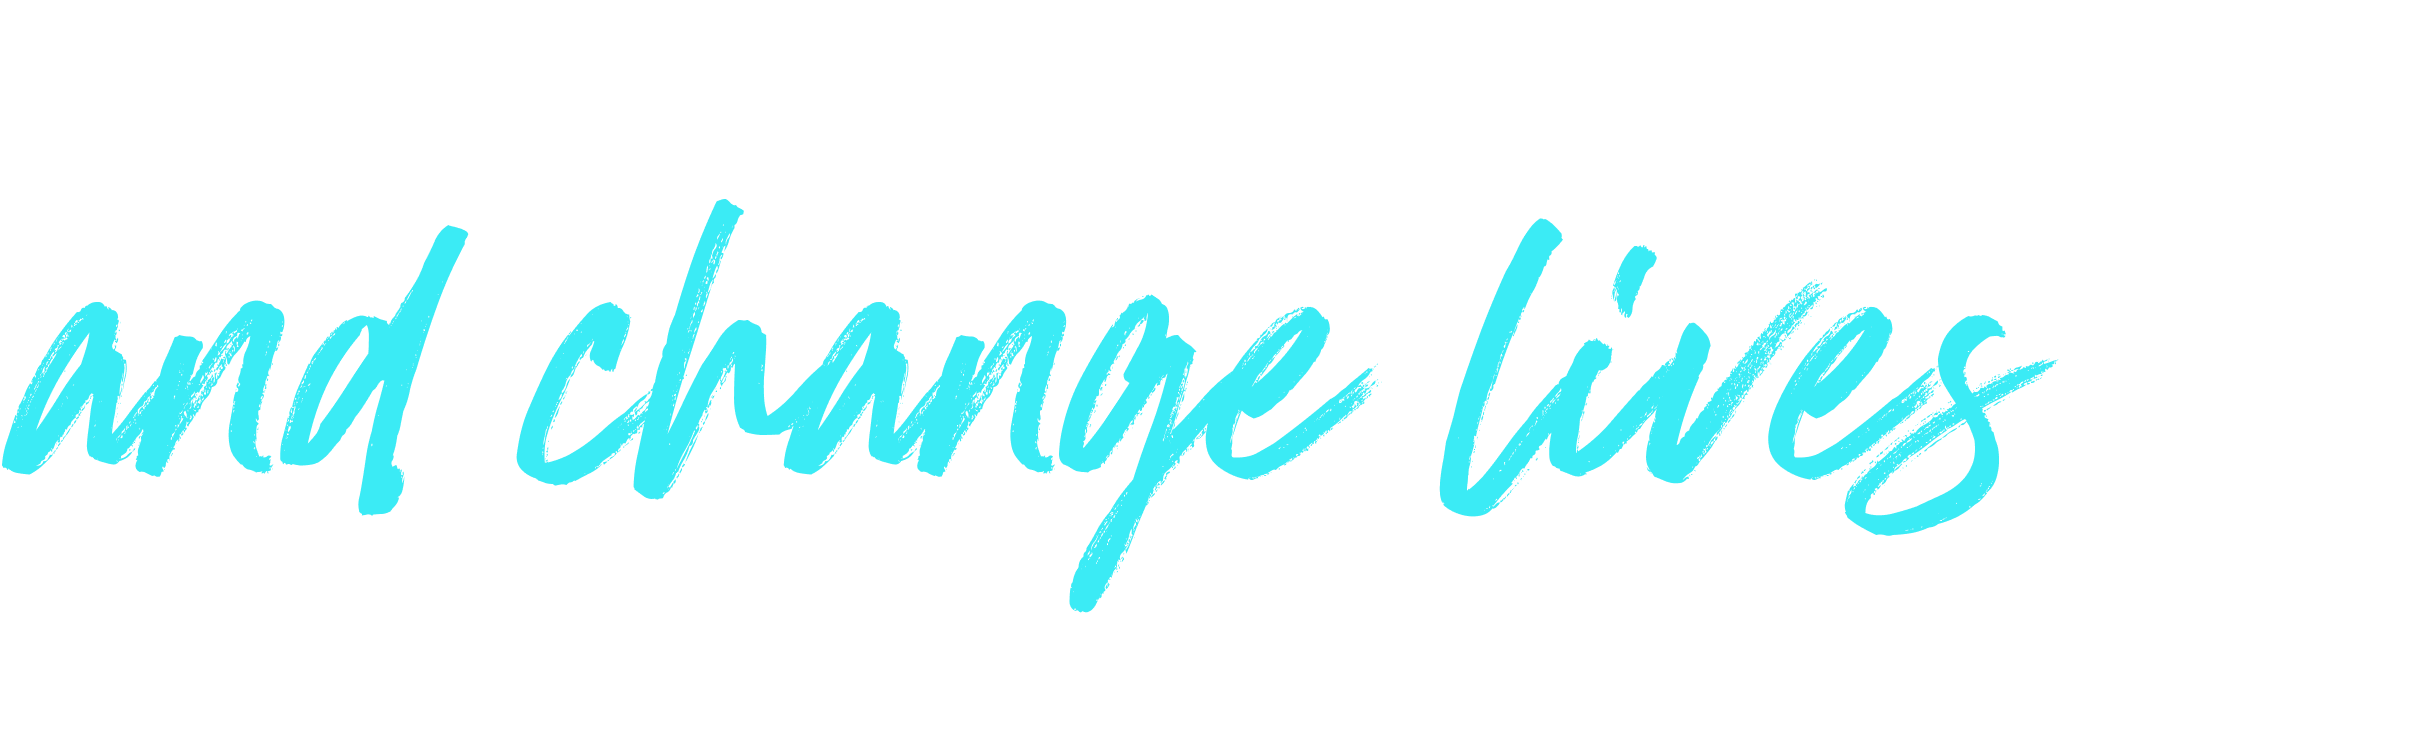 Make money and change lives as a financial coach.